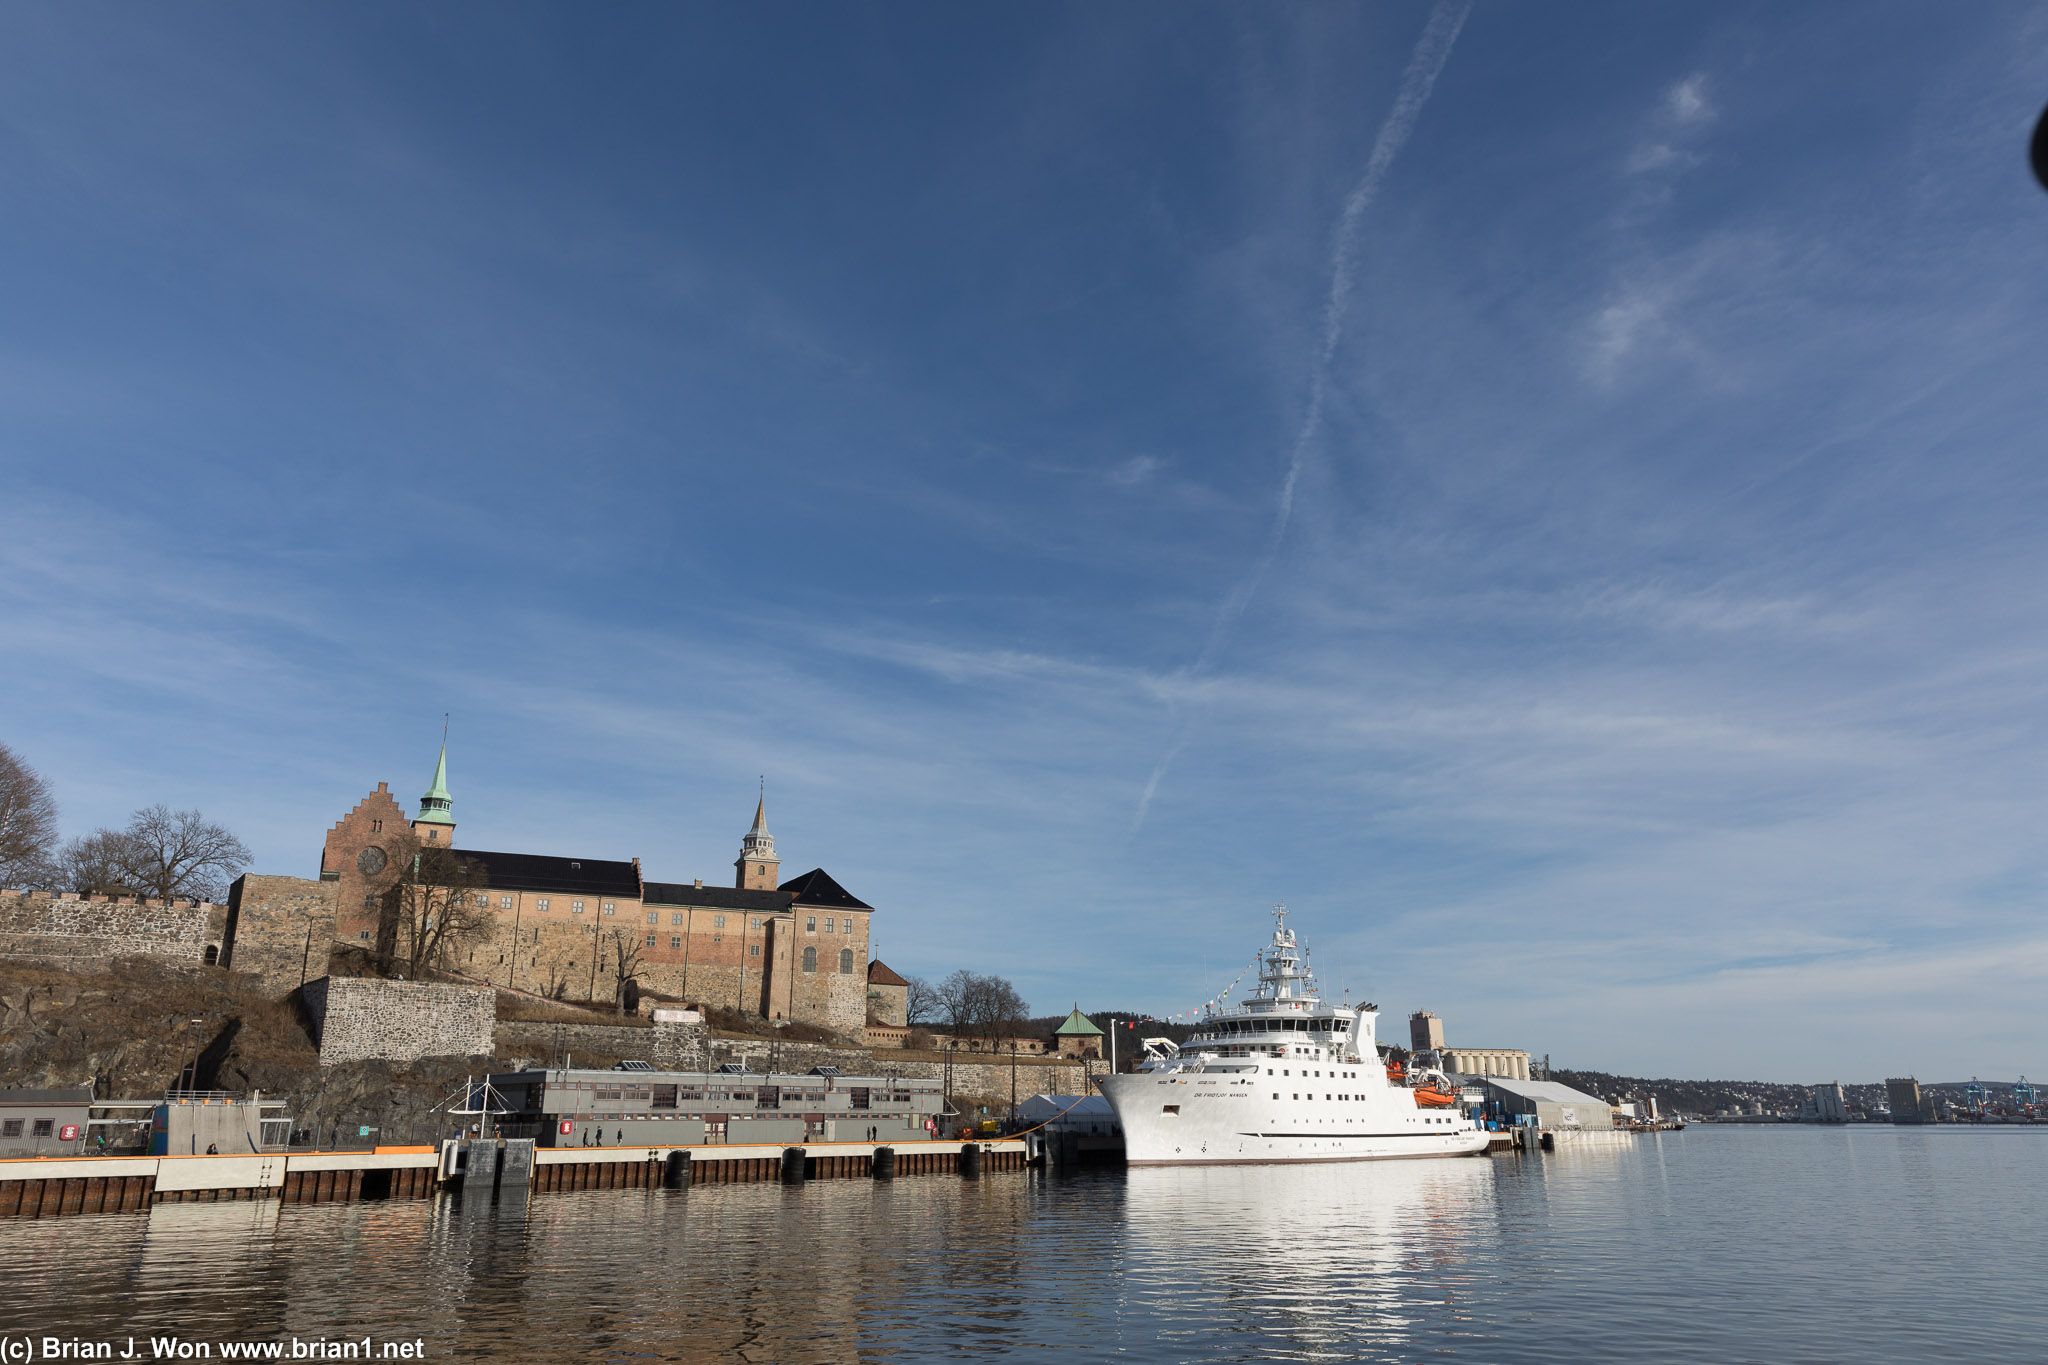 Akershus Fortress and the ship Dr. Fridtjof Nansen visible on the Oslo harbor cruise.